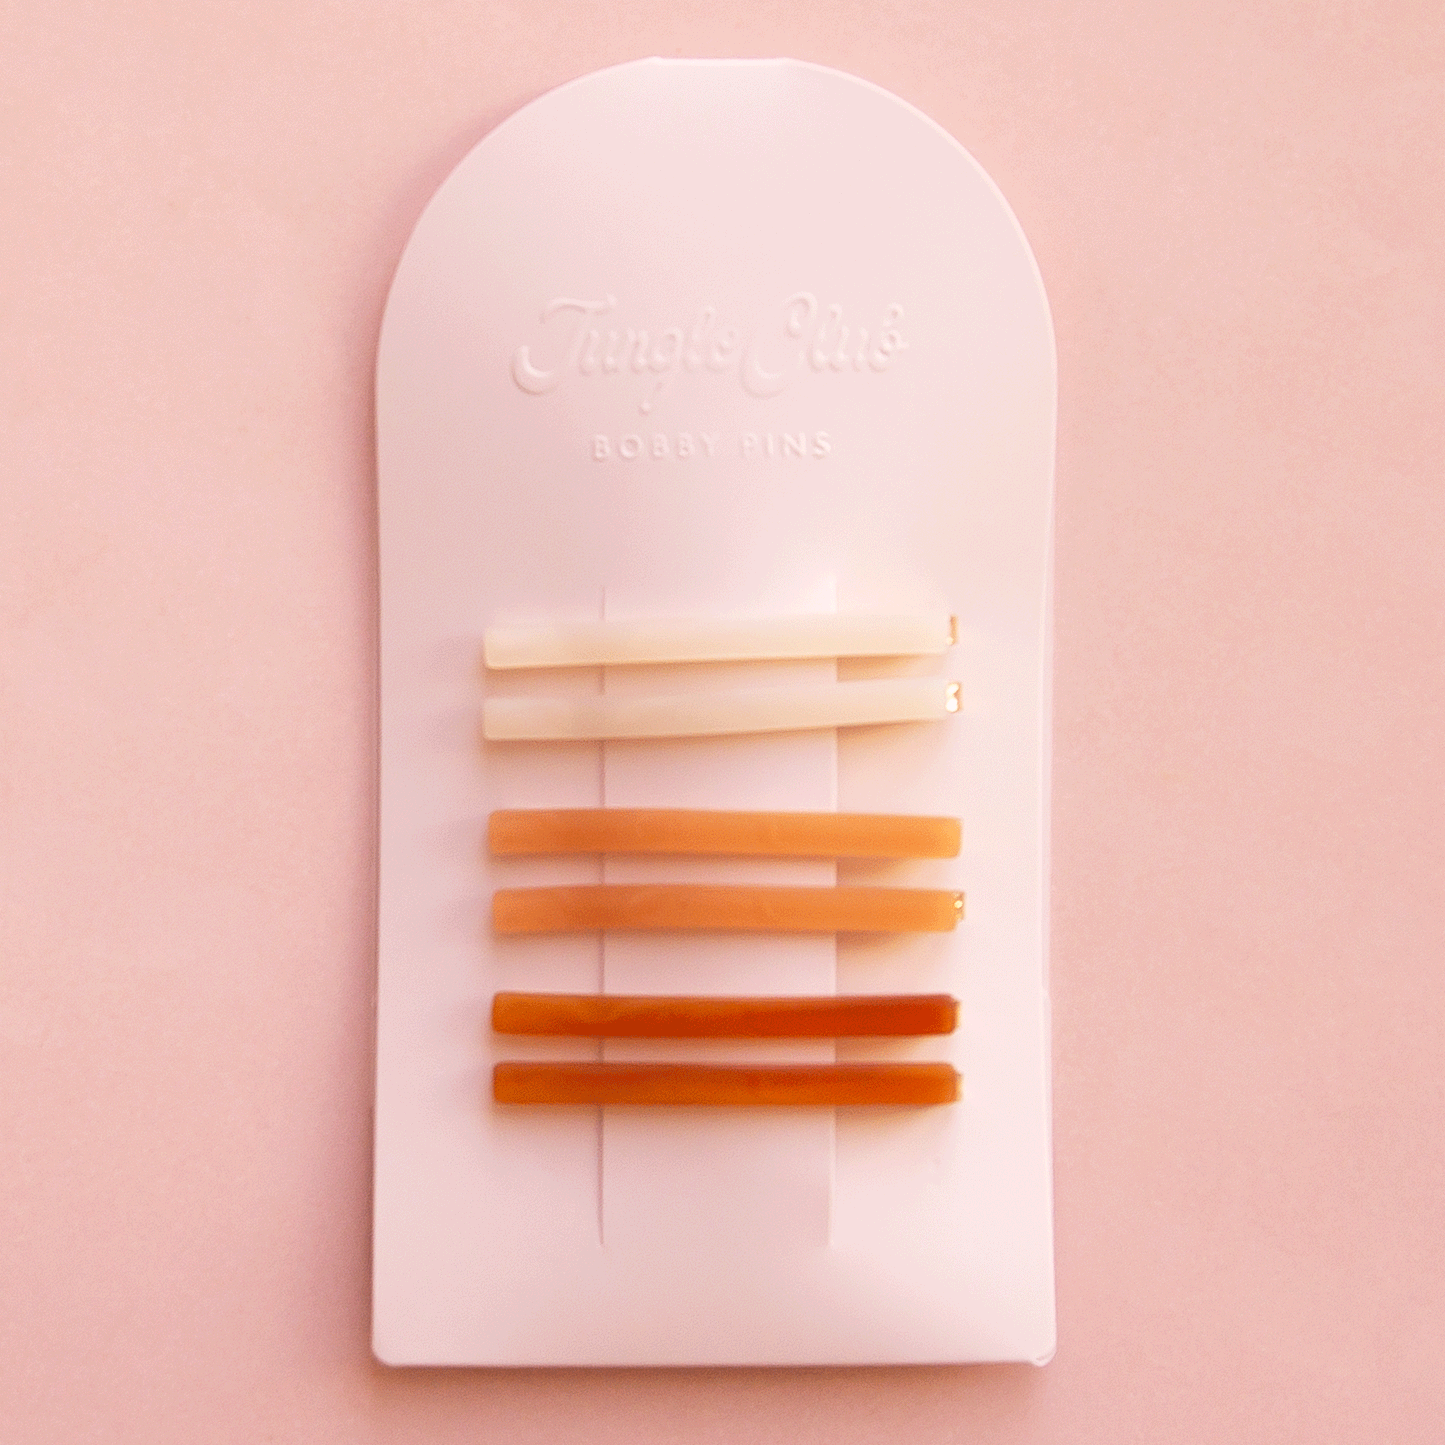 On a pink background is an arched packaging with embossed text at the top that reads, "Jungle Club Bobby Pins" along with six thin hair clips in three colors from an ivory shade to orange to a honey rust color.